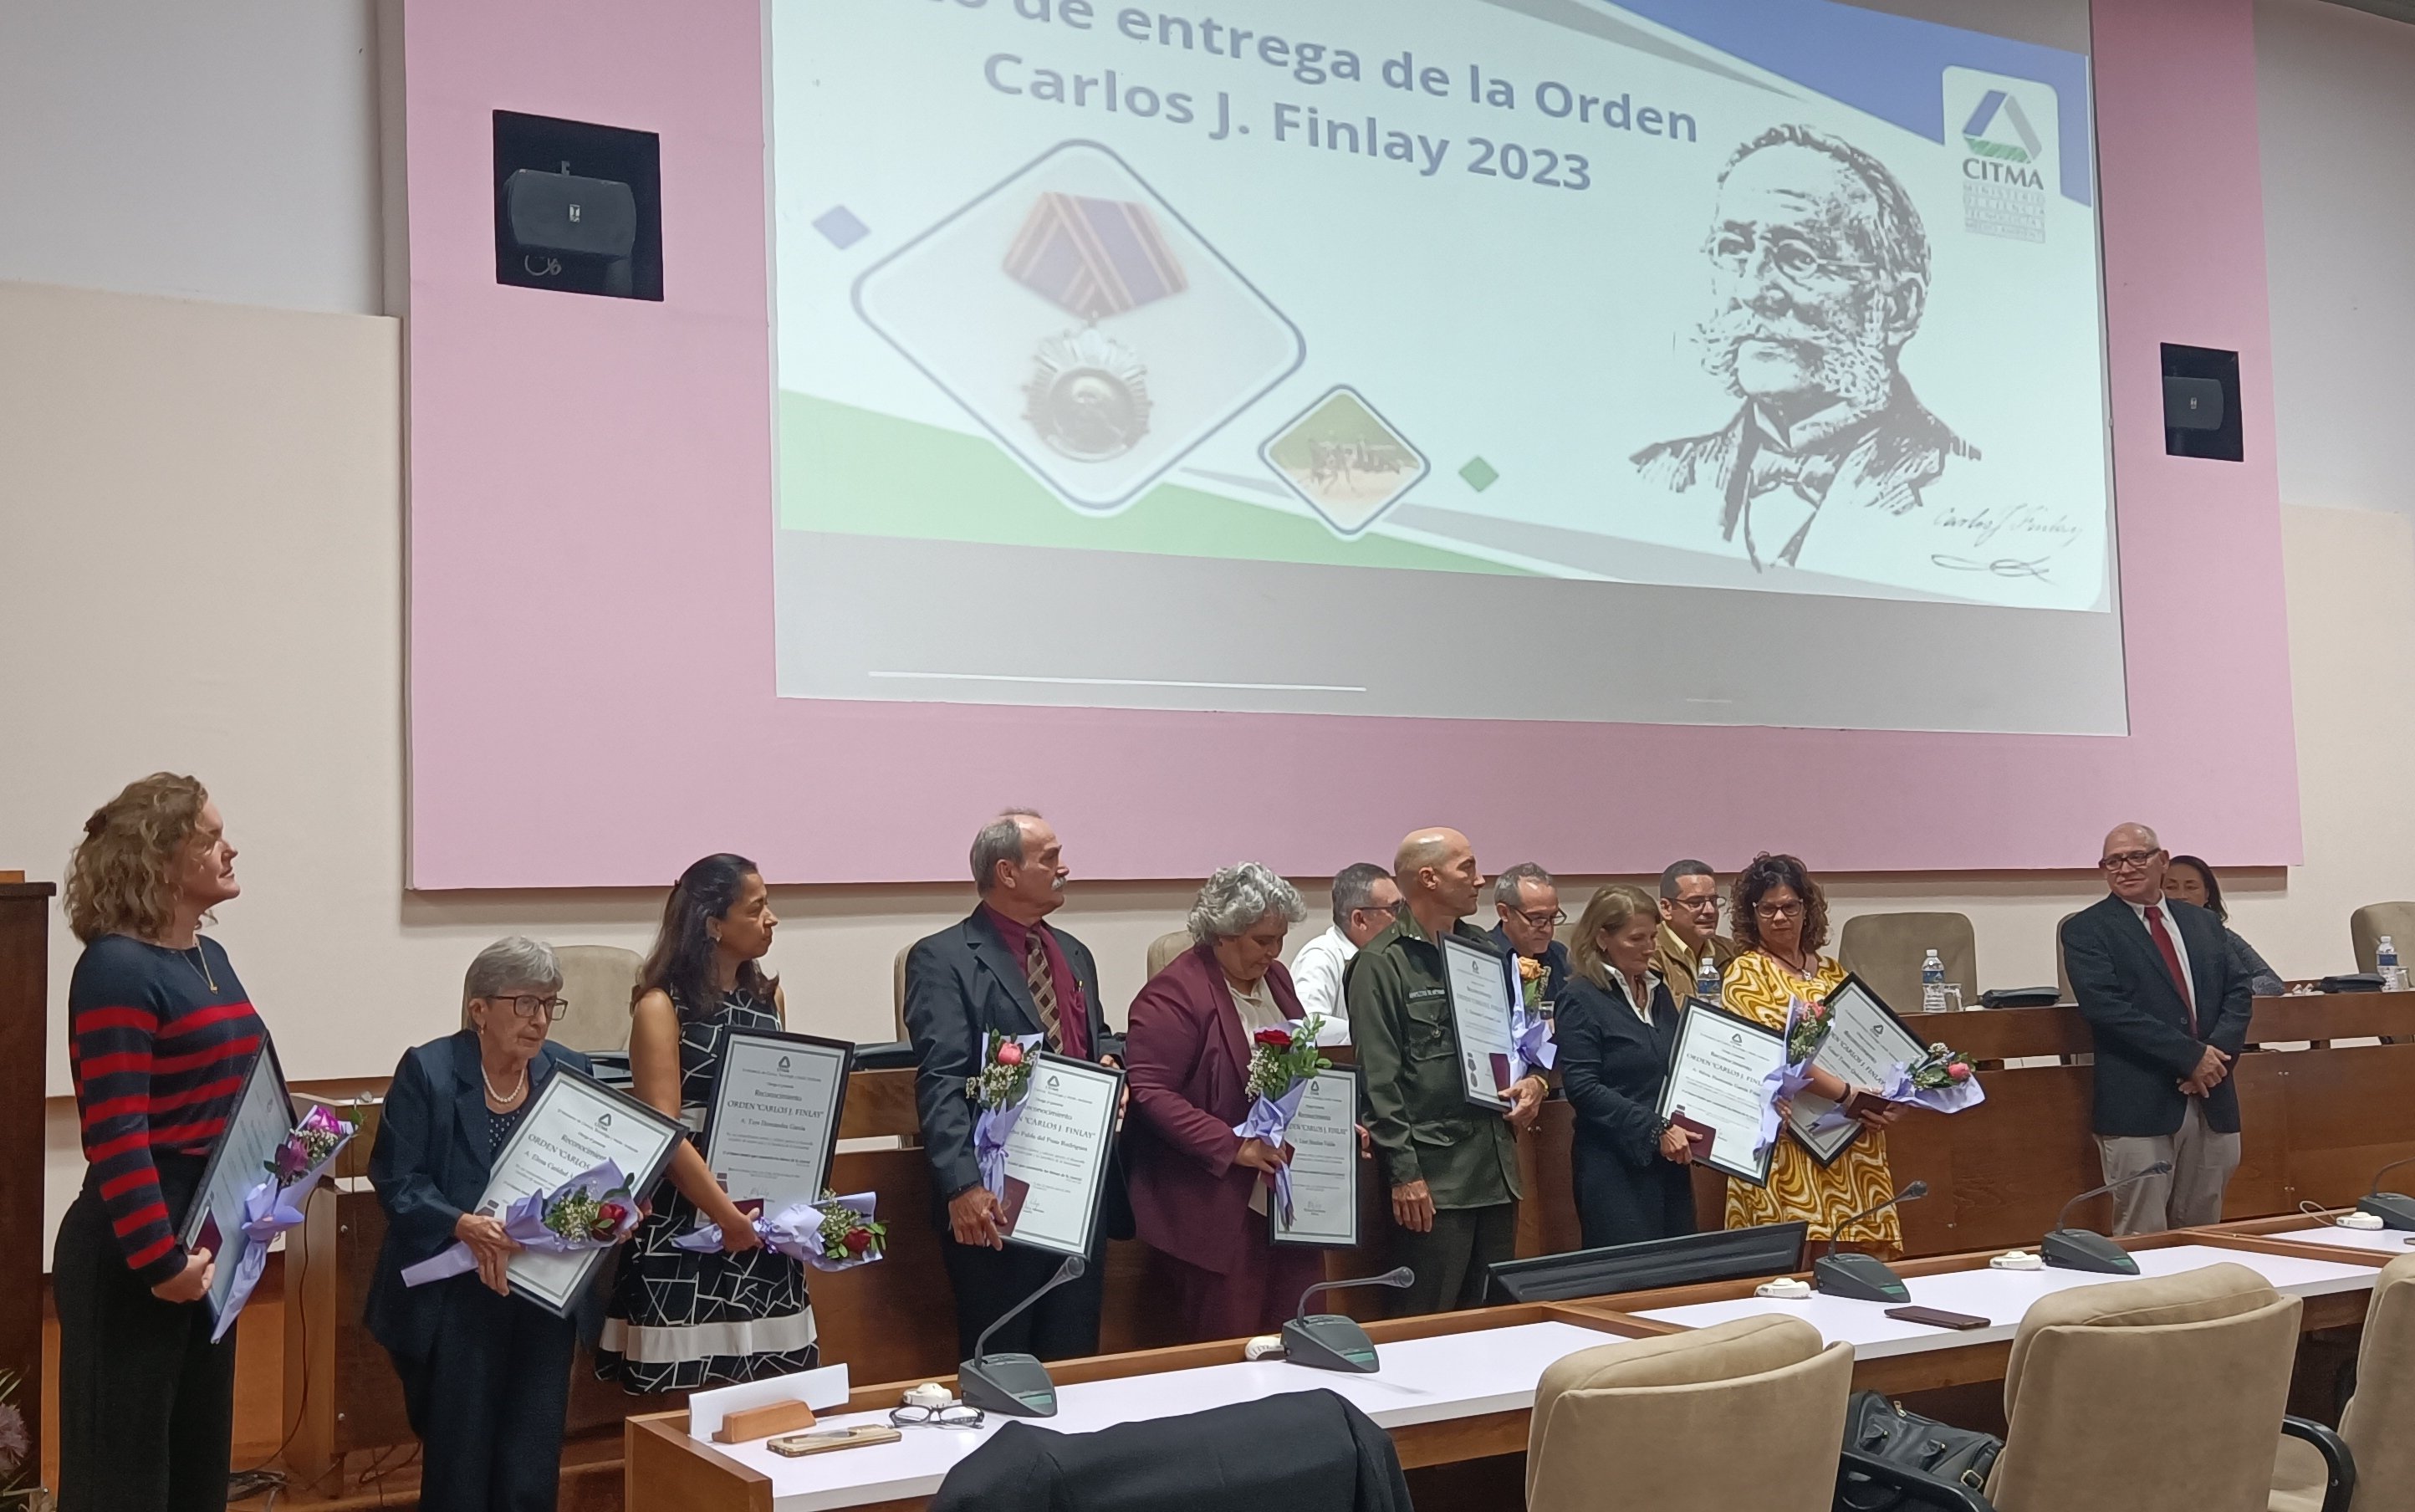 Cuba awards the Carlos J. Finlay Order to prominent scientists (+ Photo)